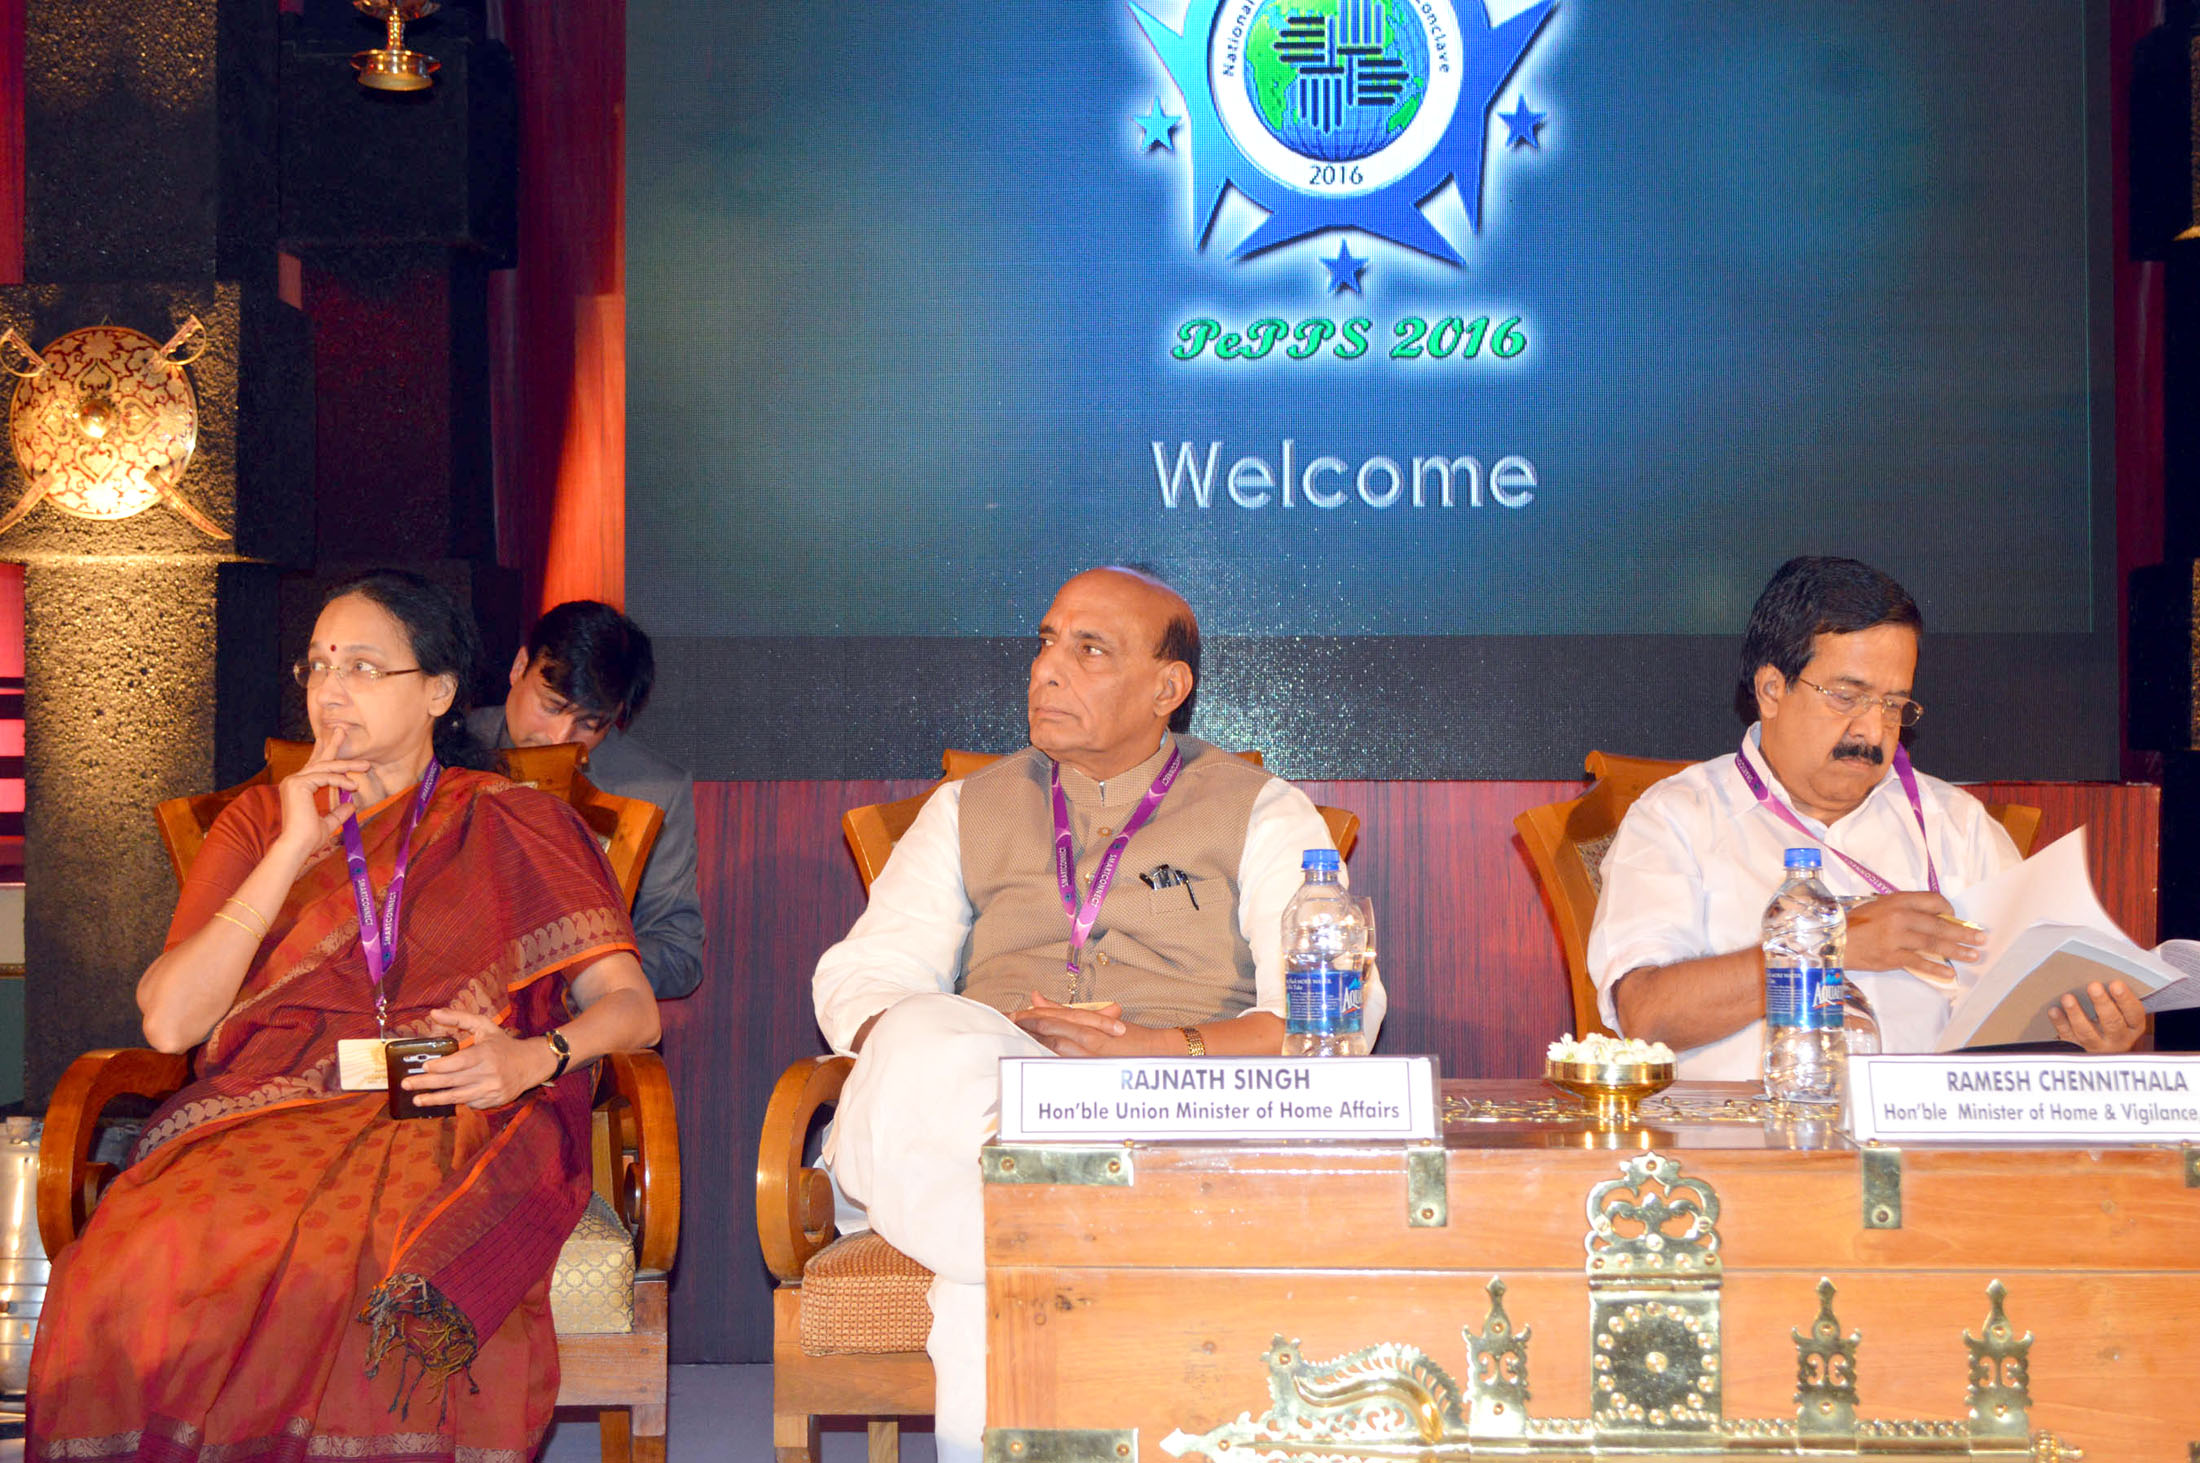 The Union Home Minister, Shri Rajnath Singh at the inauguration of the National Conclave on Community Policing, at Kovalam, in Thiruvananthapuram Kerala on January 27, 2016.  	The Kerala Home Minister, Shri Ramesh Chennithala and the State Home Secretary, Smt. Nalini Netto are also seen.